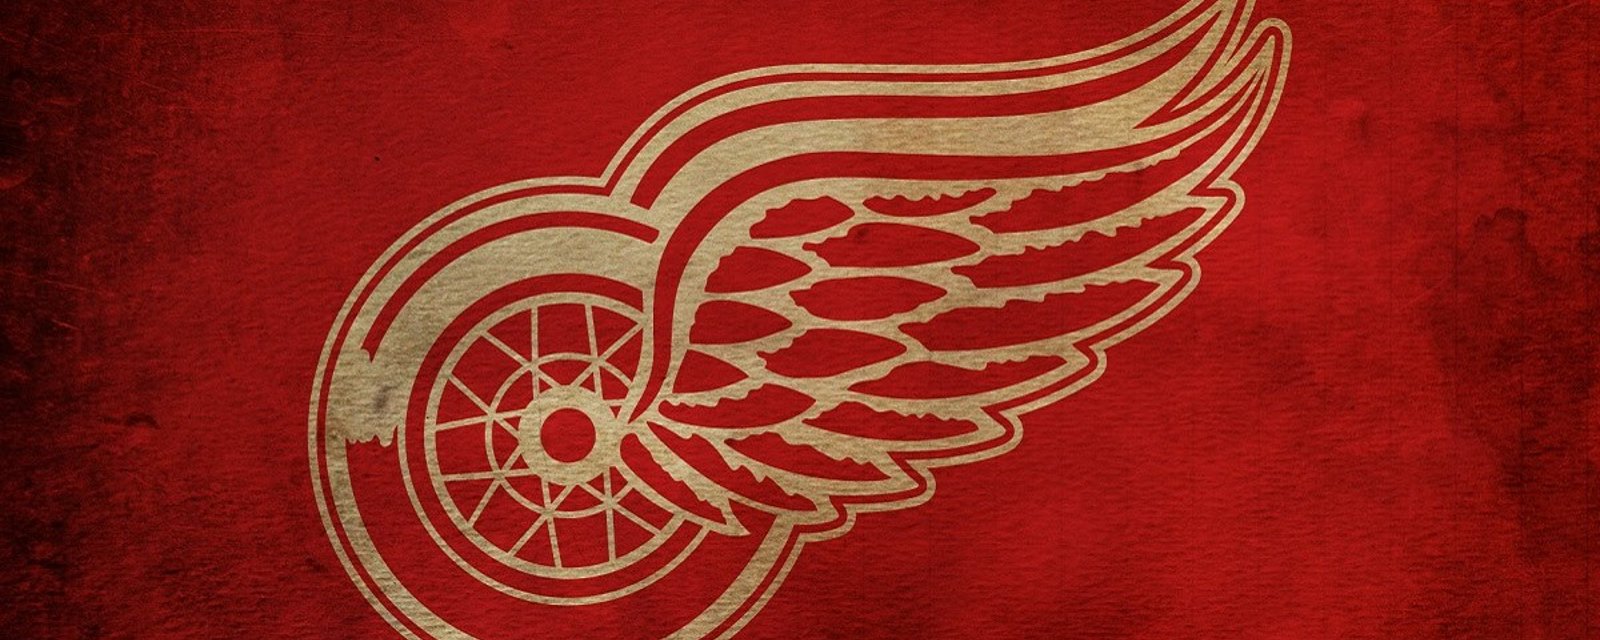 BREAKING: Red Wings Name New Assistant Captain